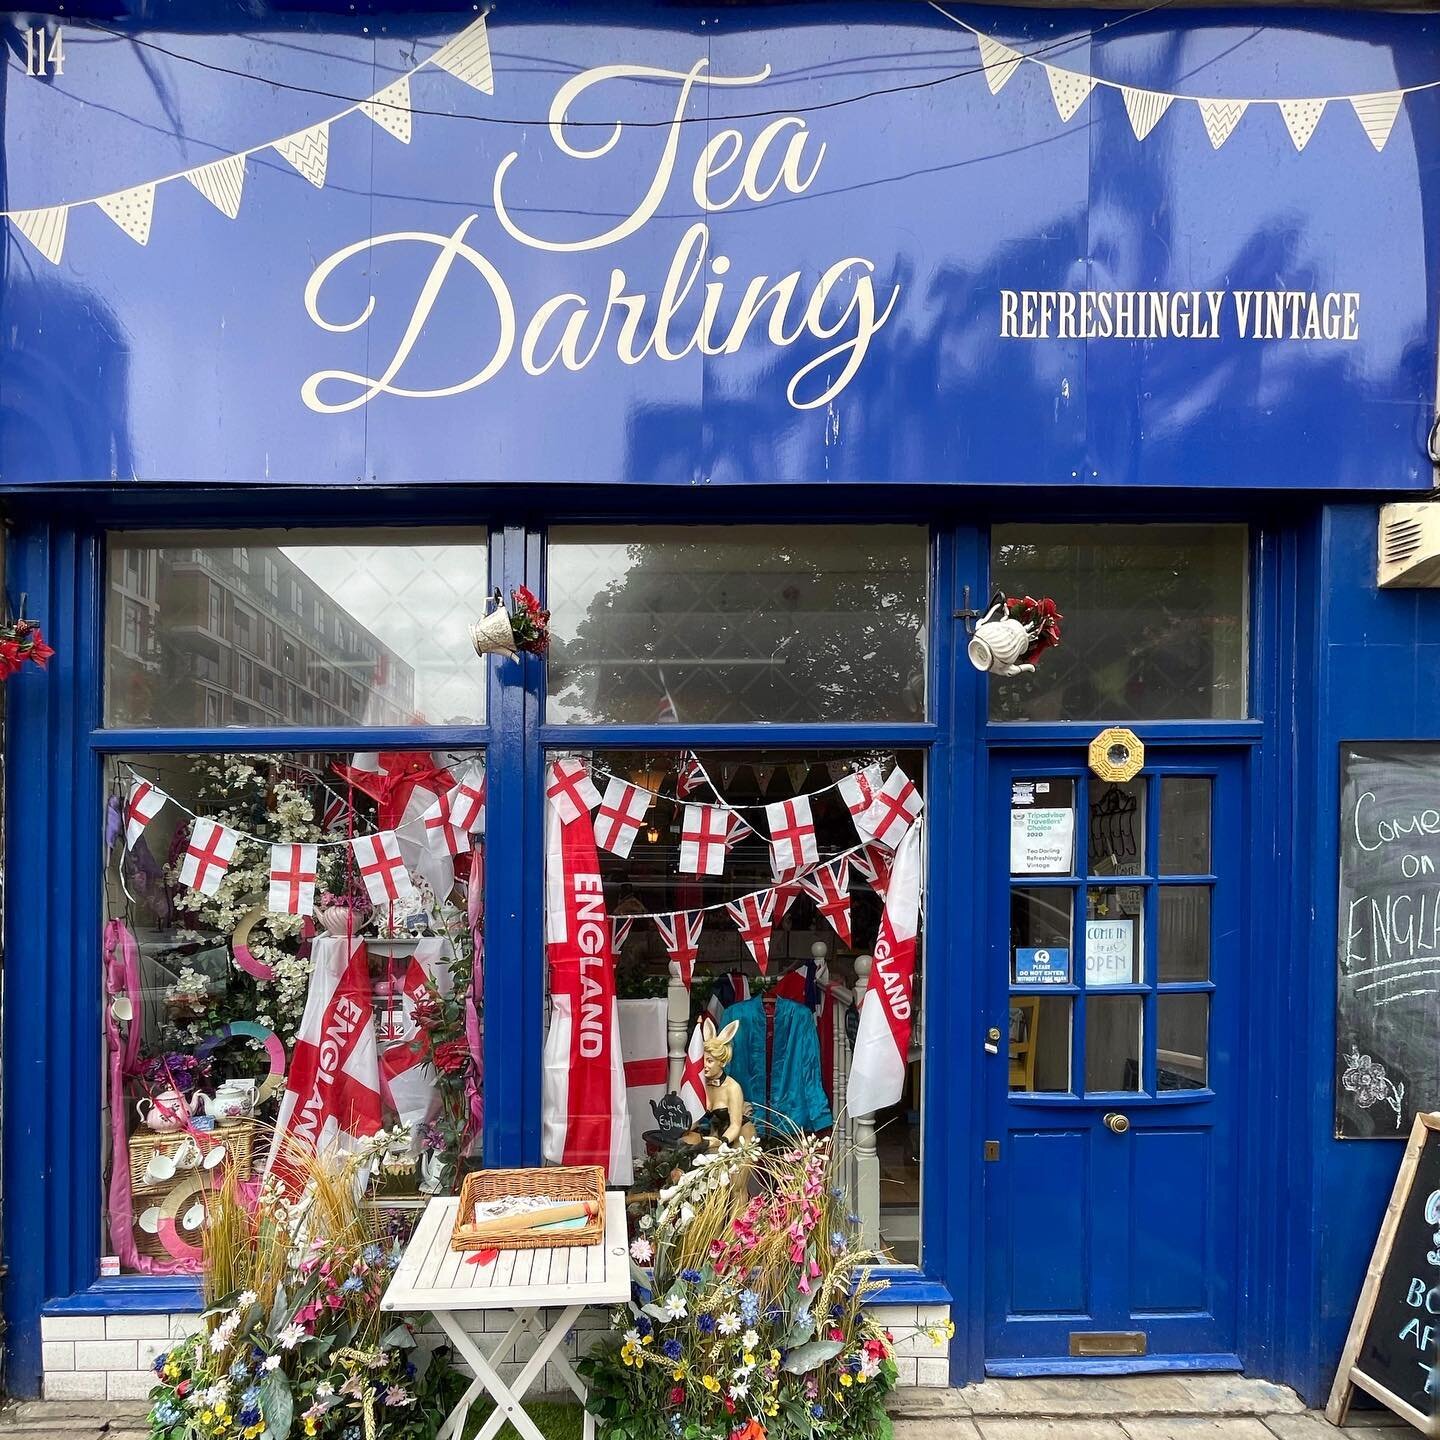 Magical! The final we all dreamed of! Time for every shop window to follow suit!&hellip; #churchfieldrdw3 @teadarlinglondon #euro2020window #itscominghome